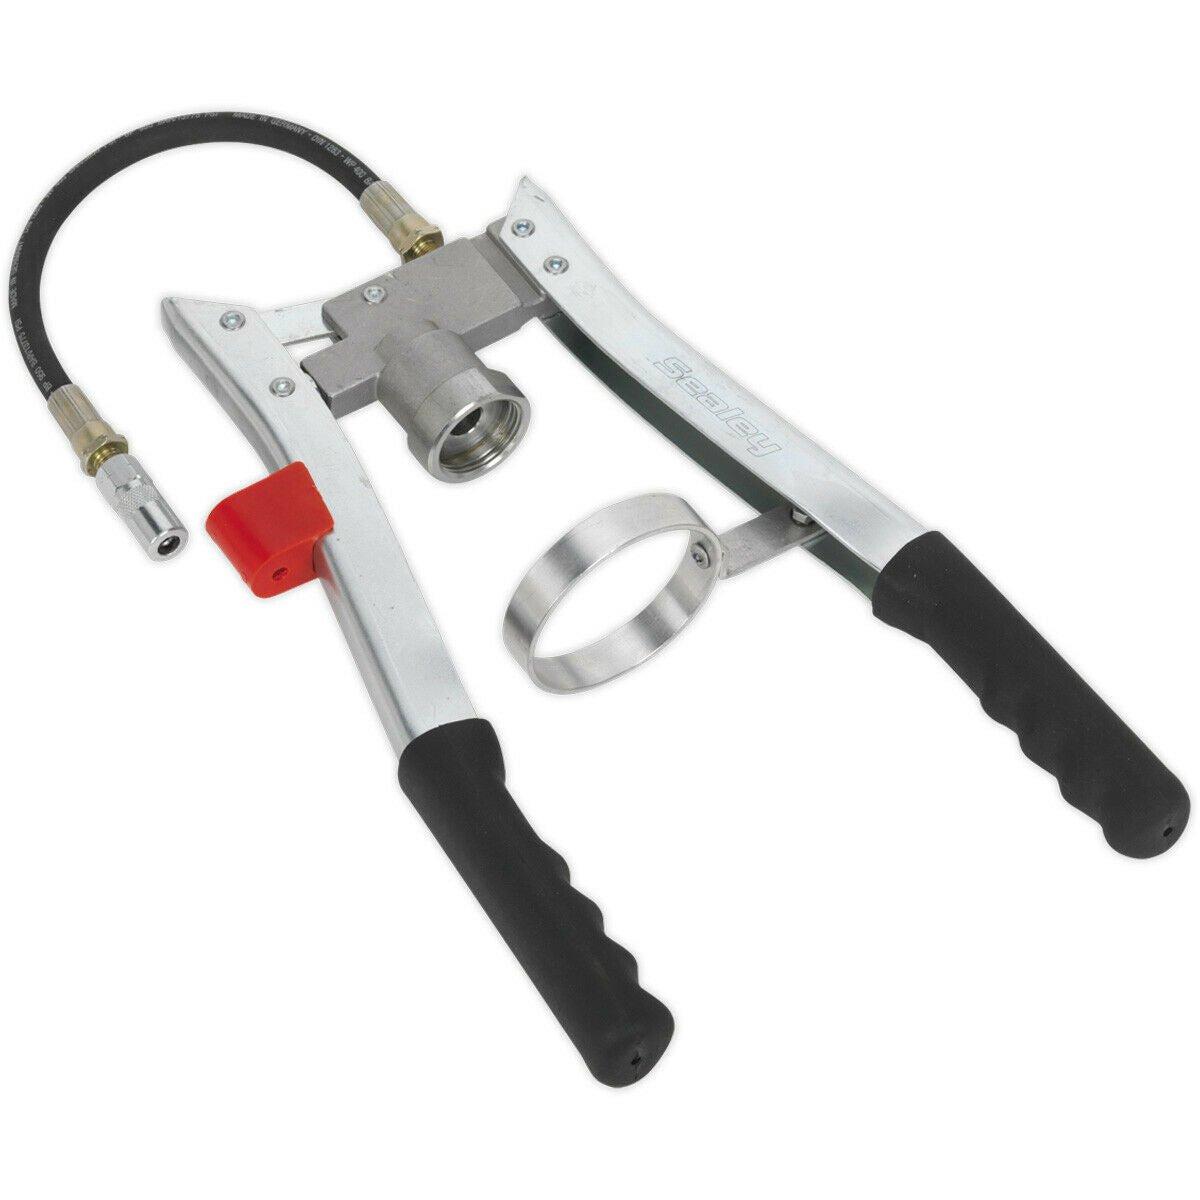 Double Lever Grease Gun - 300mm Delivery Hose - 1/4